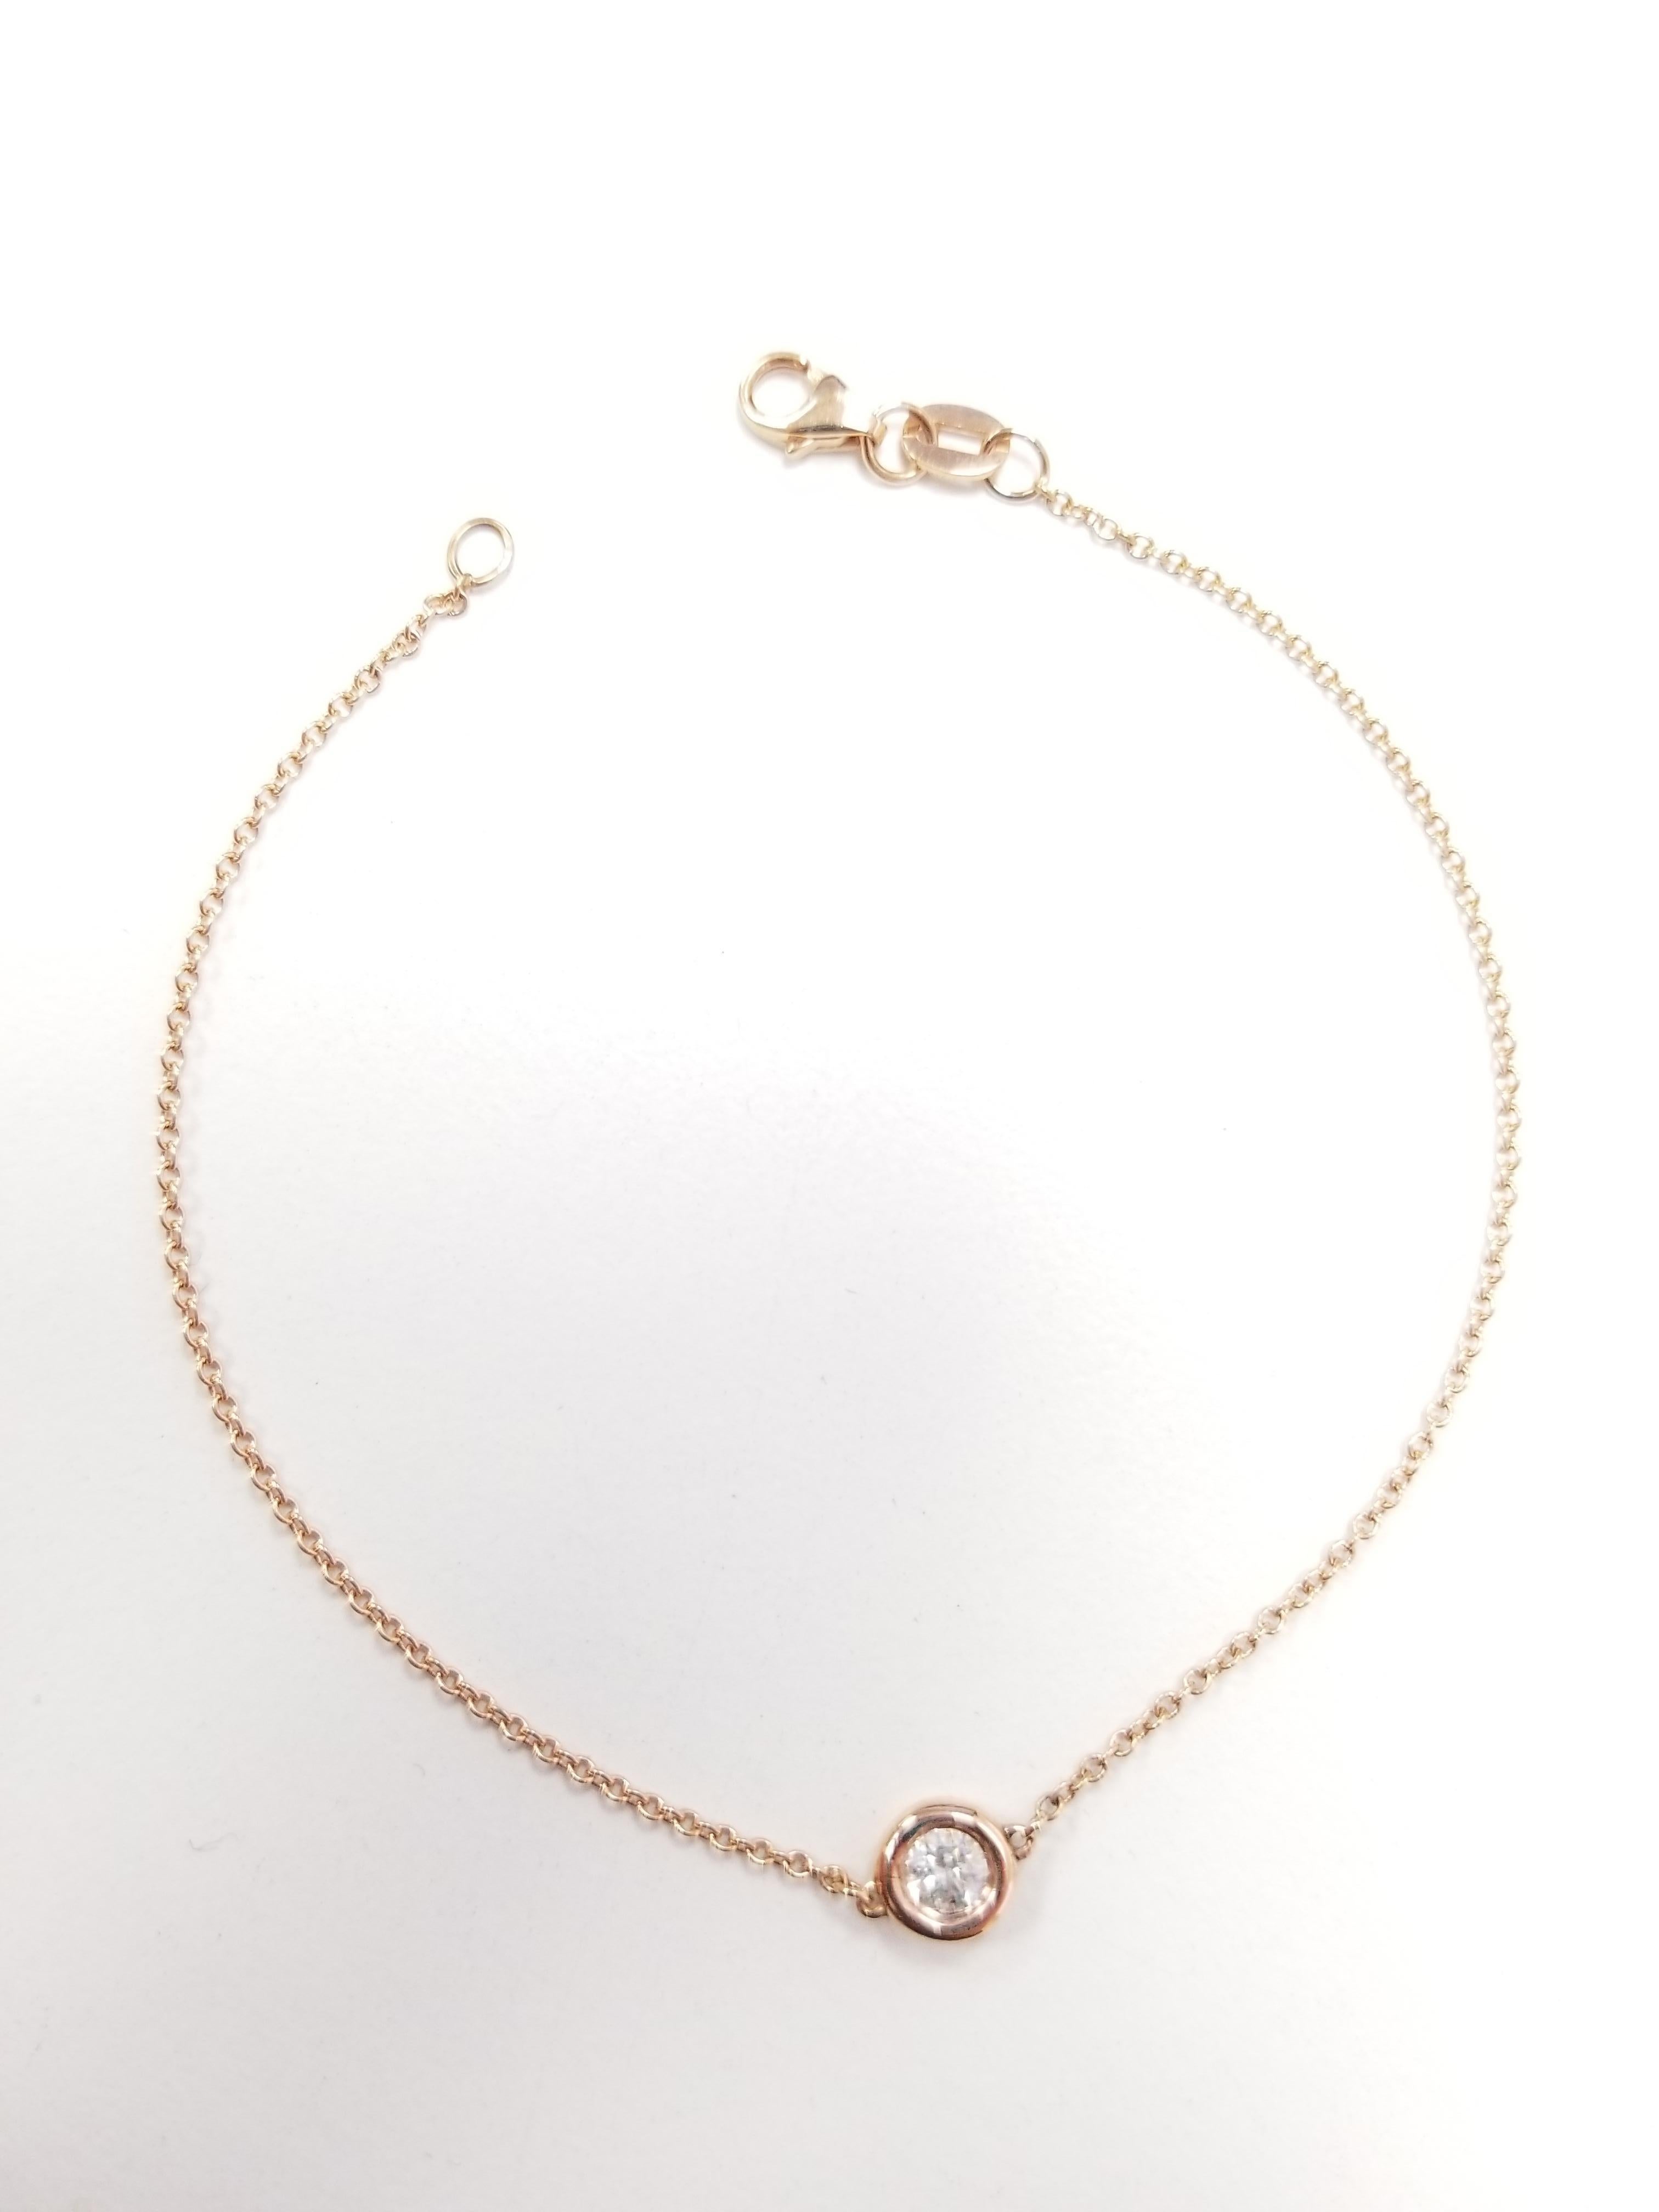 A stunning and classic bracelet perfect for everyday wear combined or simply on it's own.  A 0.23 ct White Diamond is handset in an 14k bezel and attached to a dainty chain with and clasp from 7 inch.  The bracelet is hand polished with a shiny